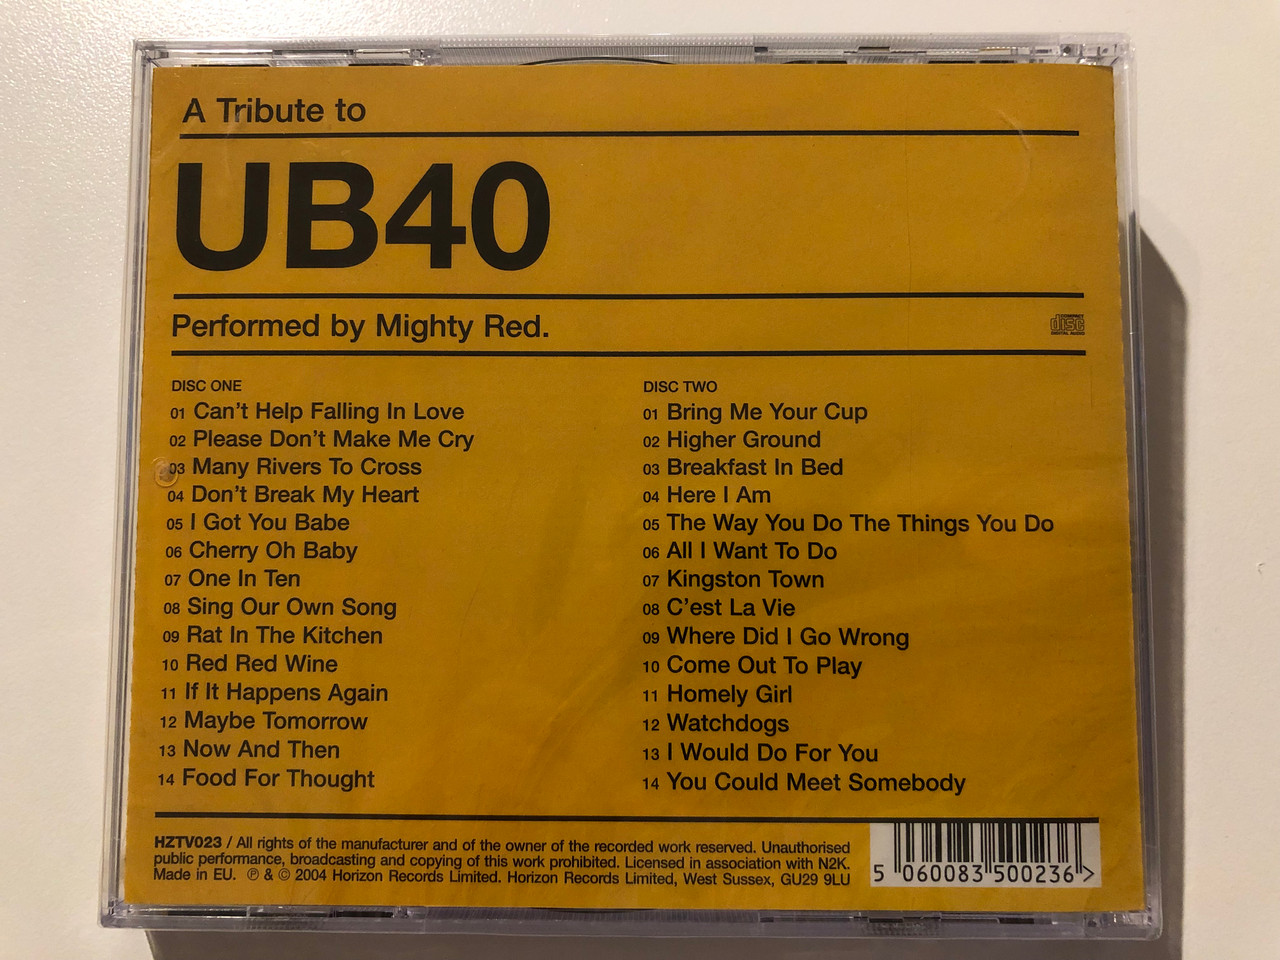 https://cdn10.bigcommerce.com/s-62bdpkt7pb/products/0/images/214217/A_Tribute_To_UB40_-_Performed_by_Mighty_Red._Features_I_Got_You_Babe_Red_Red_Wine_Kingston_Town_Cant_Help_Falling_In_Love_Higher_Ground_Rat_In_The_Kitchen_Bring_Me_Your_Cup_Horizon__95316.1645720650.1280.1280.JPG?c=2&_gl=1*uxj716*_ga*MjA2NTIxMjE2MC4xNTkwNTEyNTMy*_ga_WS2VZYPC6G*MTY0NTcxNzU2My4zMDEuMS4xNjQ1NzIwNjI0LjYw